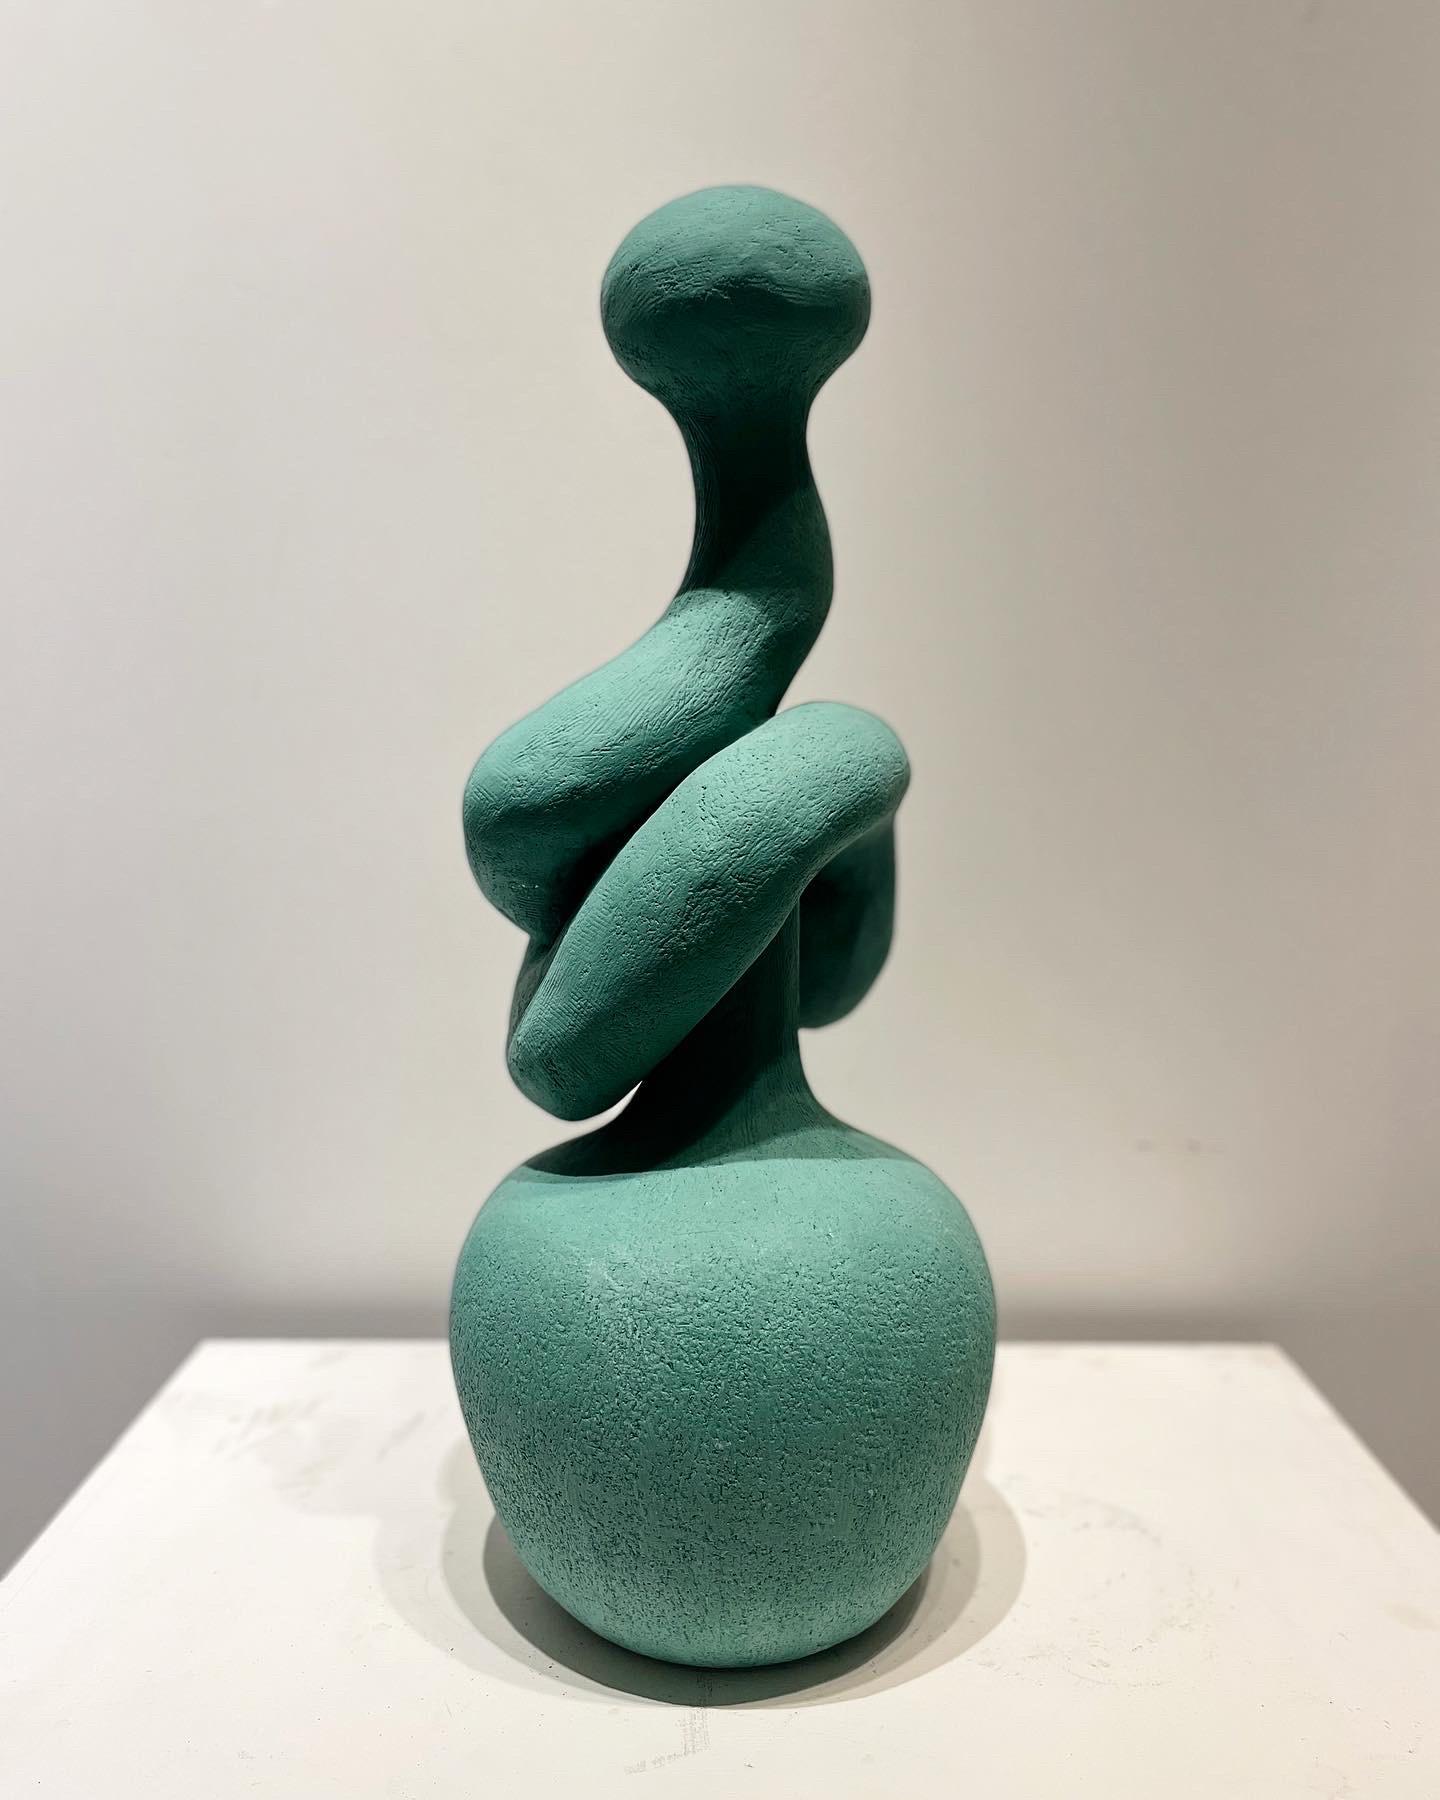 Organic Modern Knot Table Sculpture or Lamp, in Wintergreen, Handmade by Artist Stef Duffy For Sale